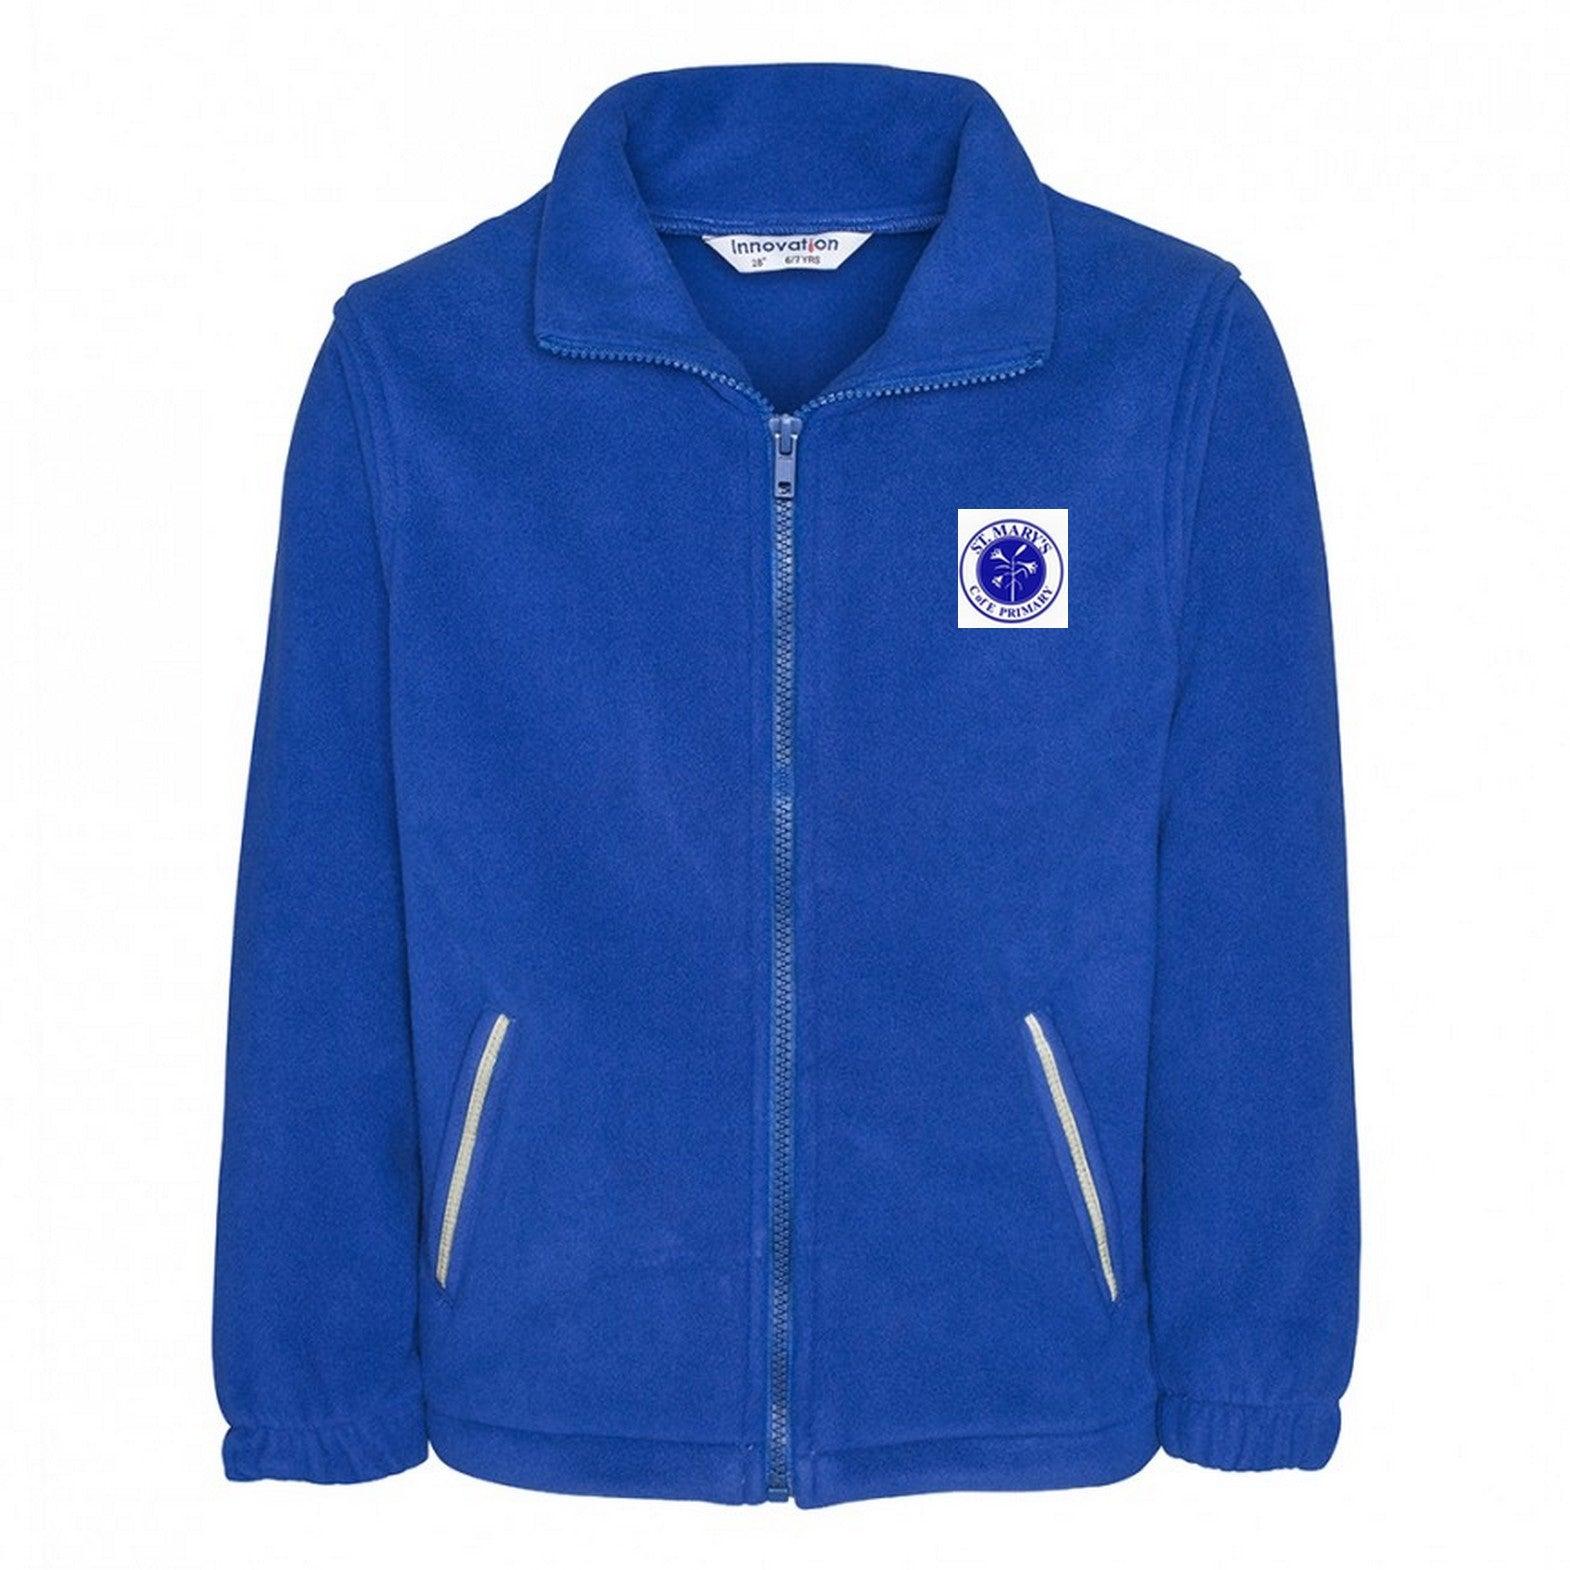 St Mary's C of E Primary School, Prittlewell - Royal Fleece Jackets with School Logo - Schoolwear Centres | School Uniform Centres